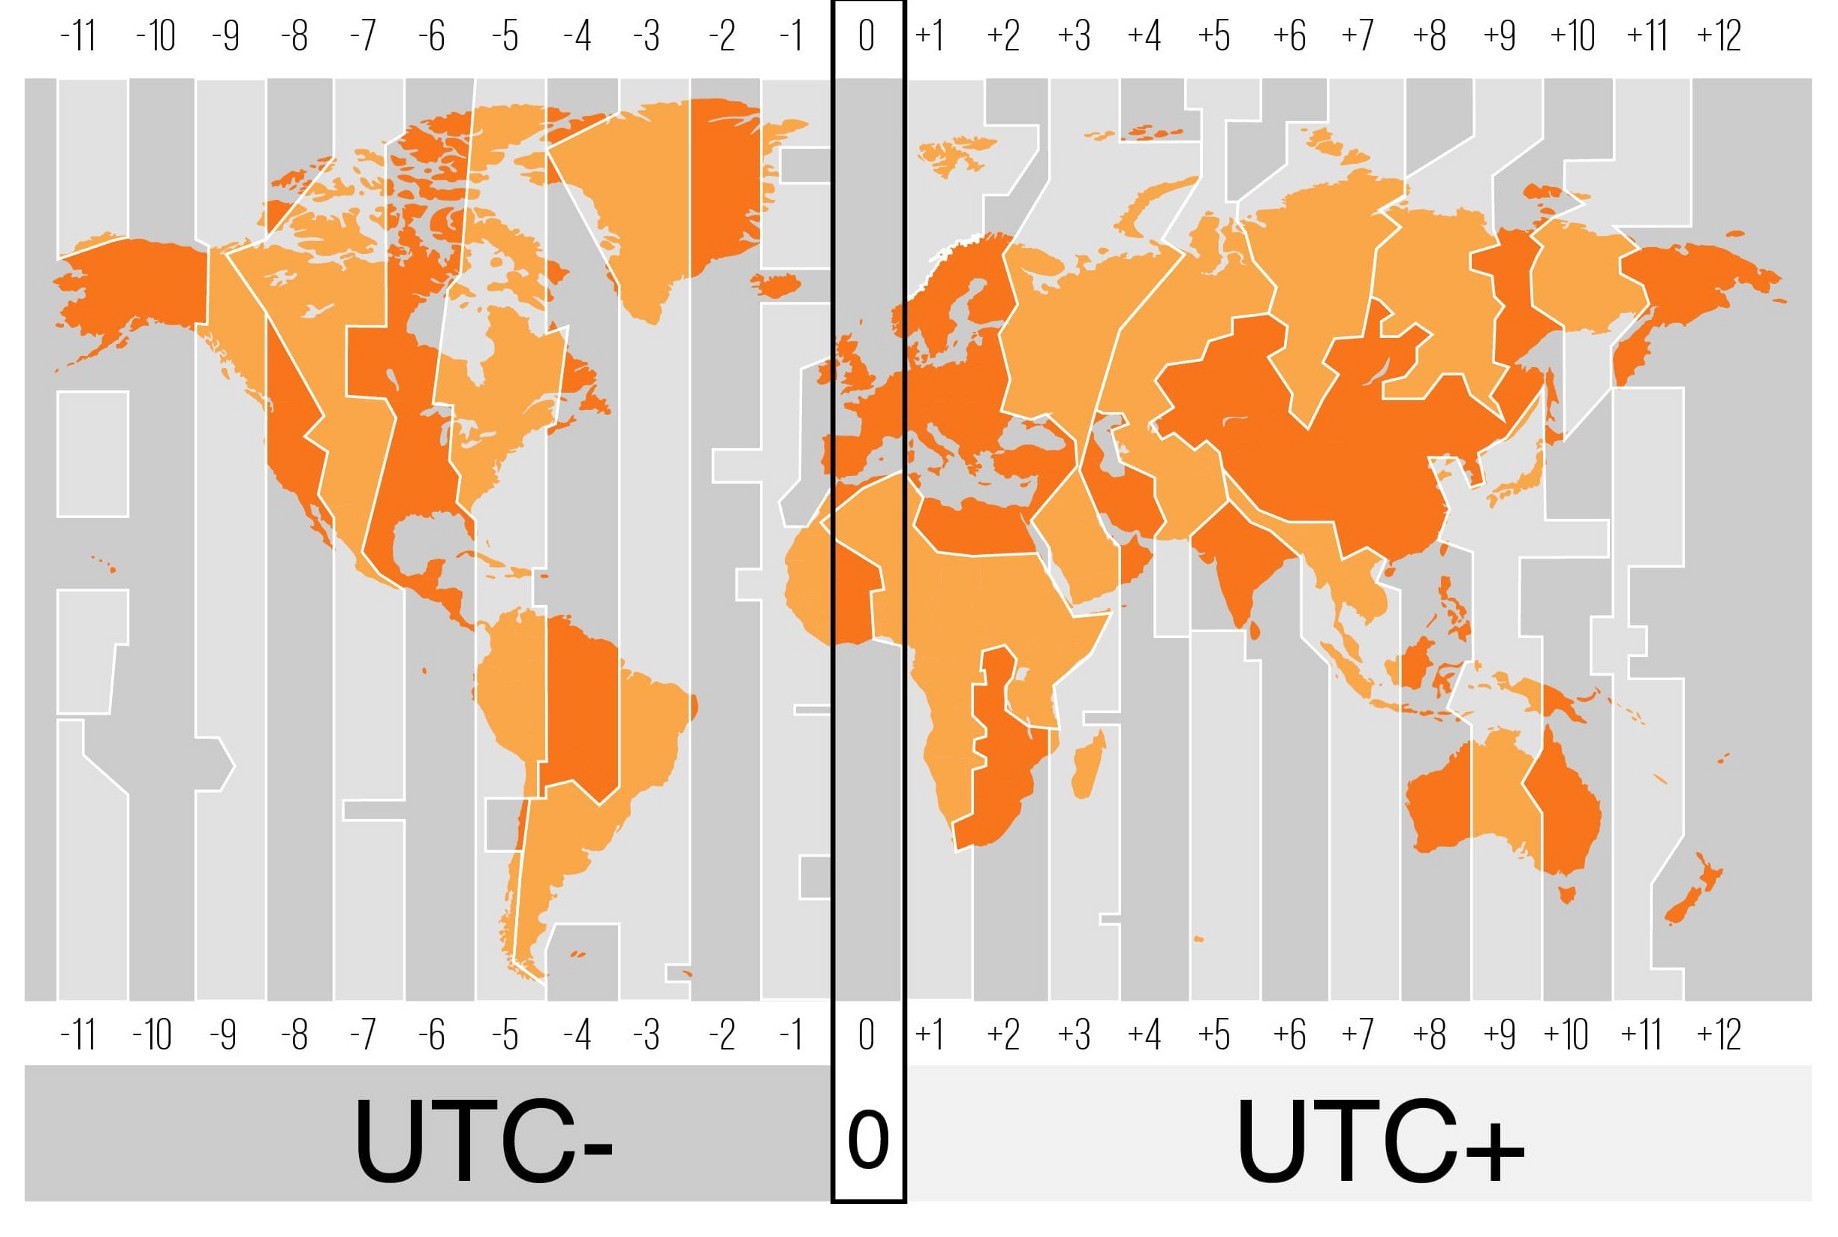 gmt 7 time zone cities